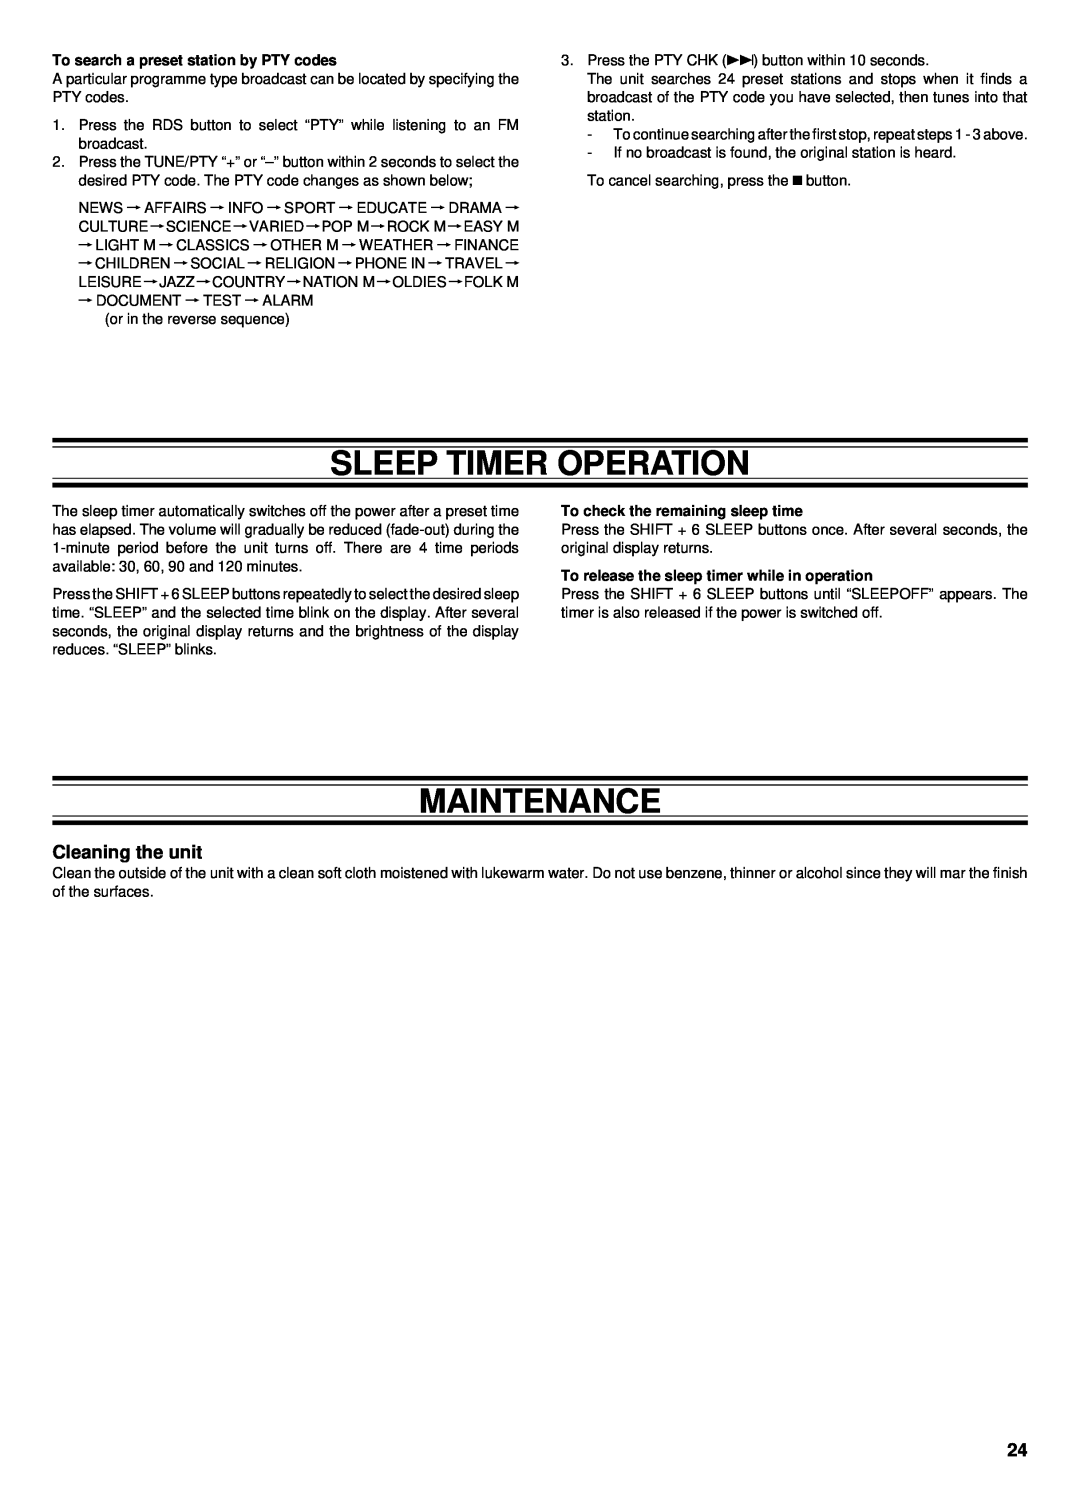 Sanyo DC-TS760 Sleep Timer Operation, Maintenance, Cleaning the unit, To search a preset station by PTY codes 